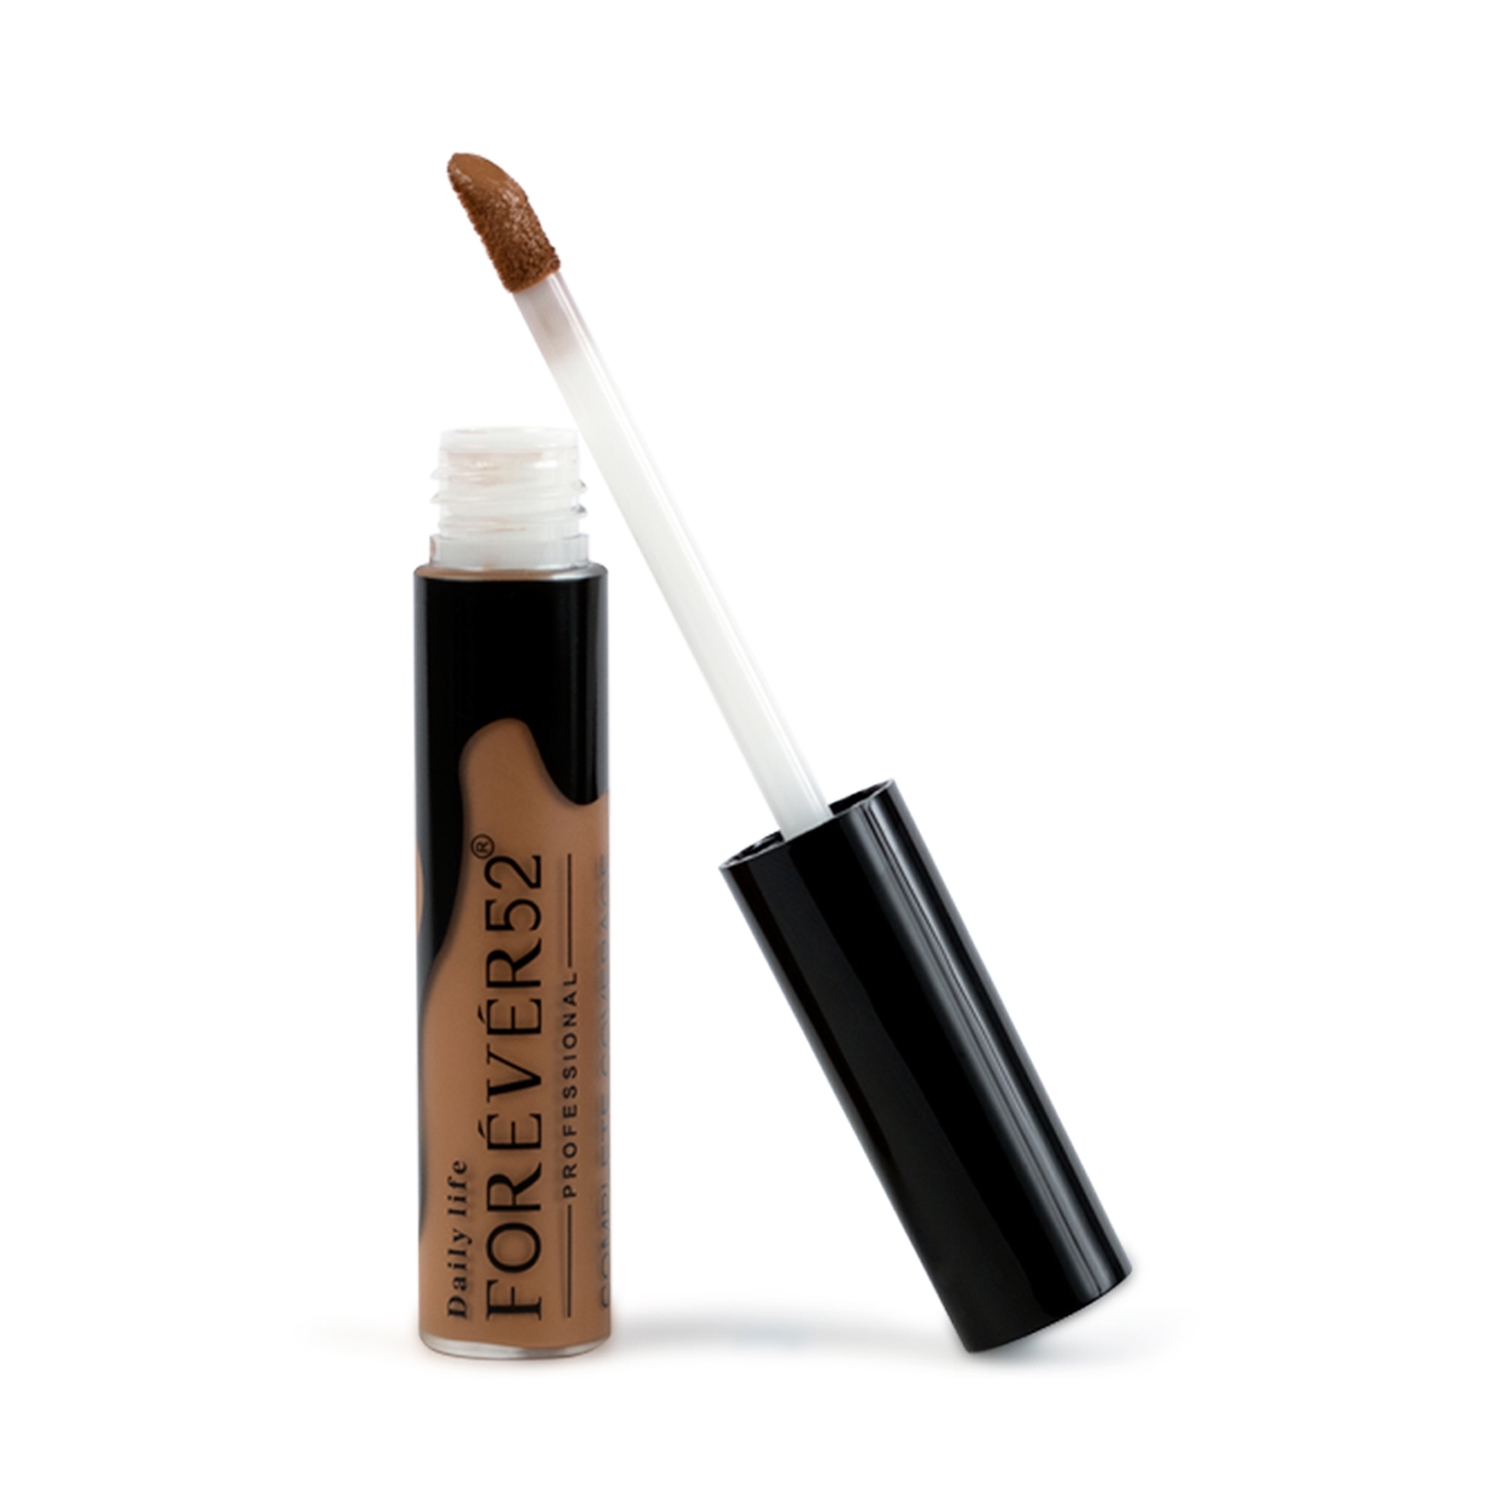 Daily Life Forever52 | Daily Life Forever52 Complete Coverage Concealer COV010 - Frappuccino (10g)